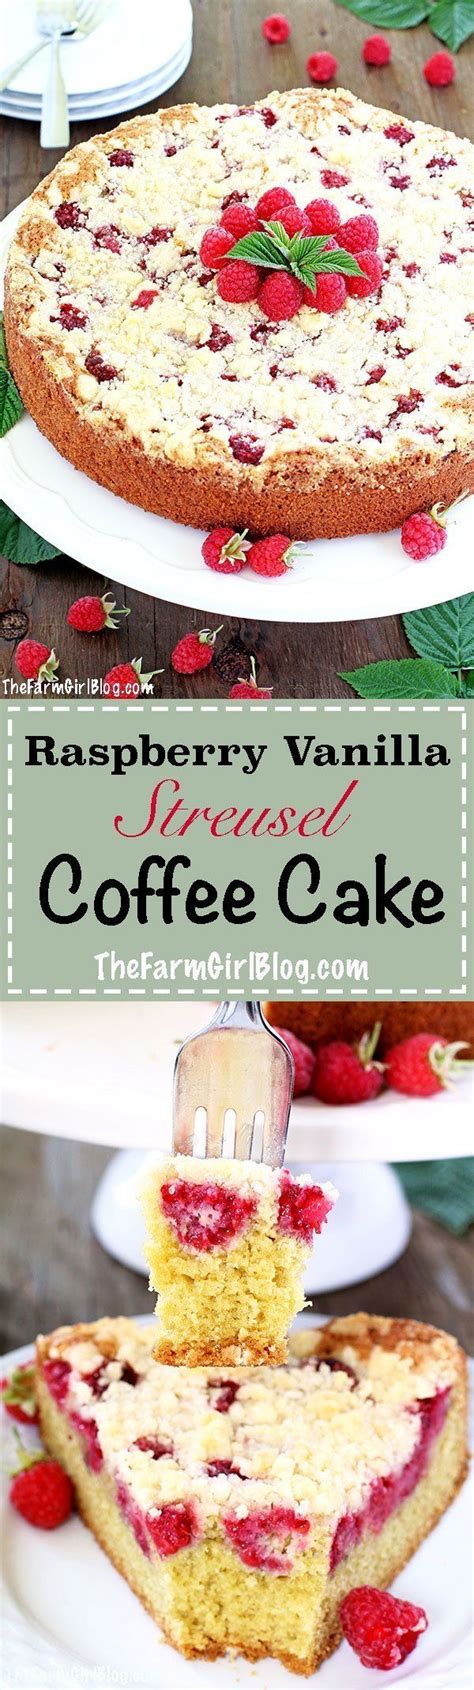 The Best Raspberry Coffee Cake With Streusel Topping Recipe